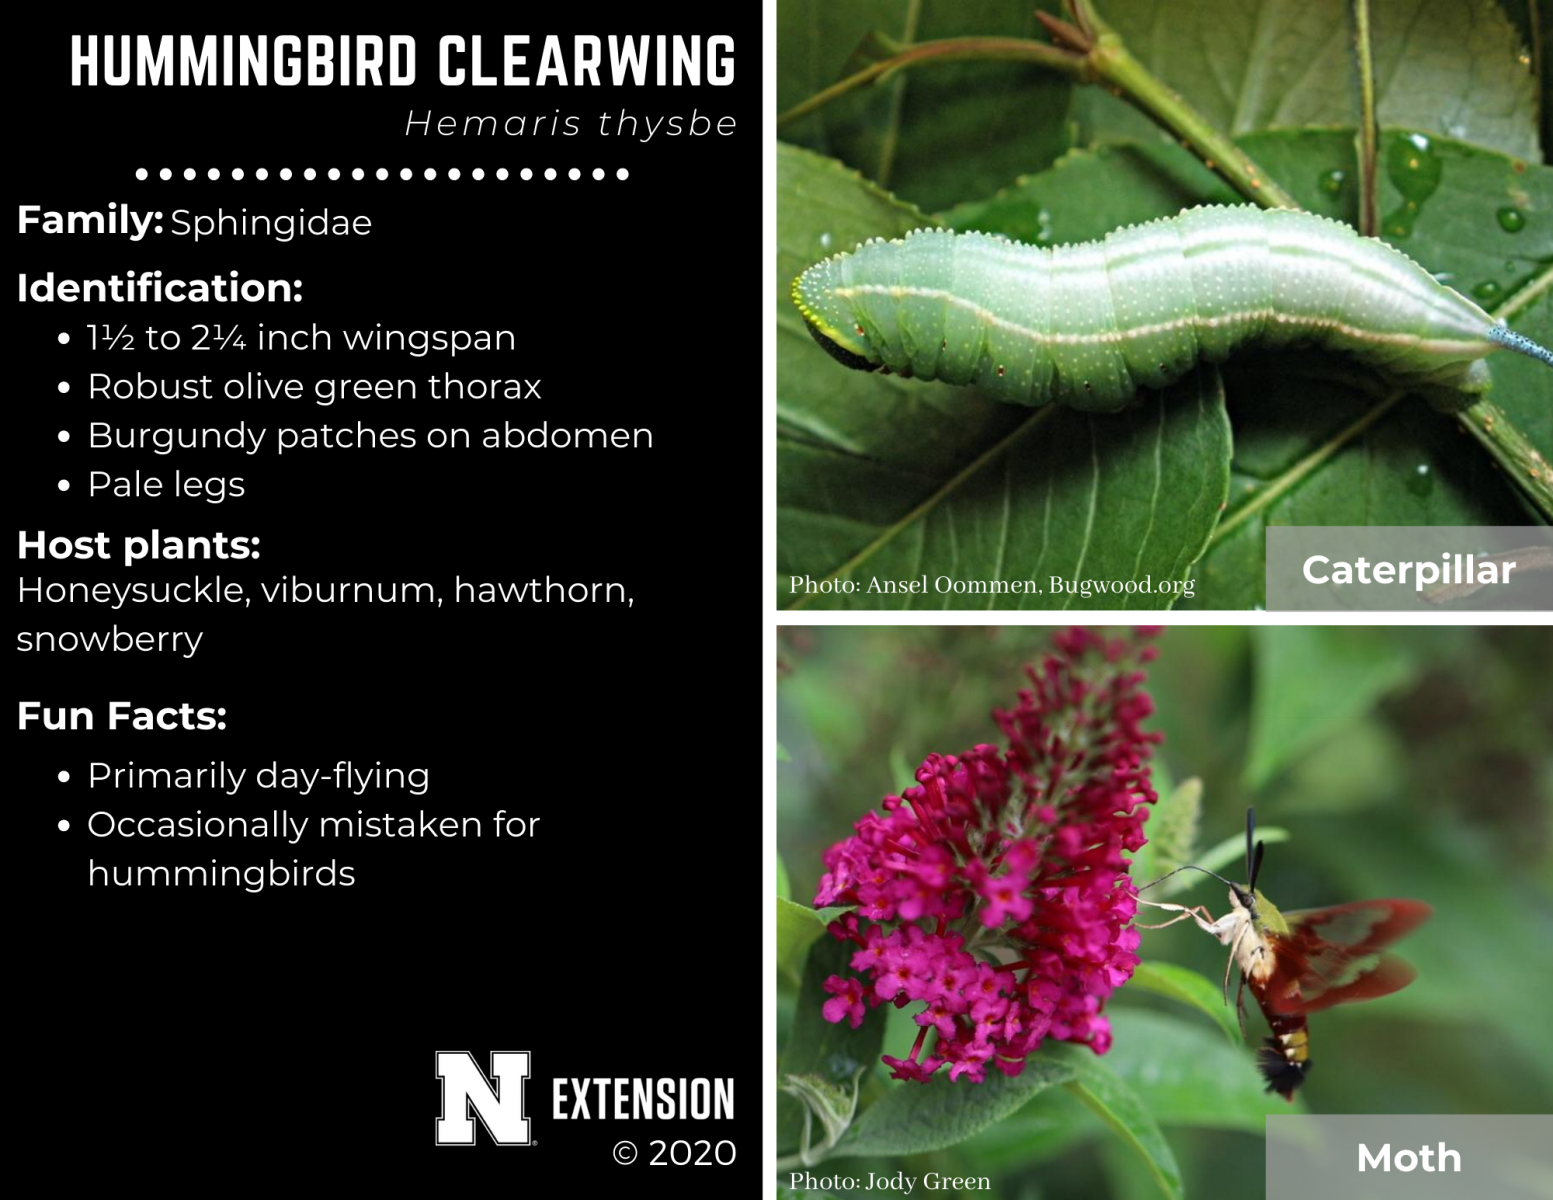 hummingbird clearwing facts